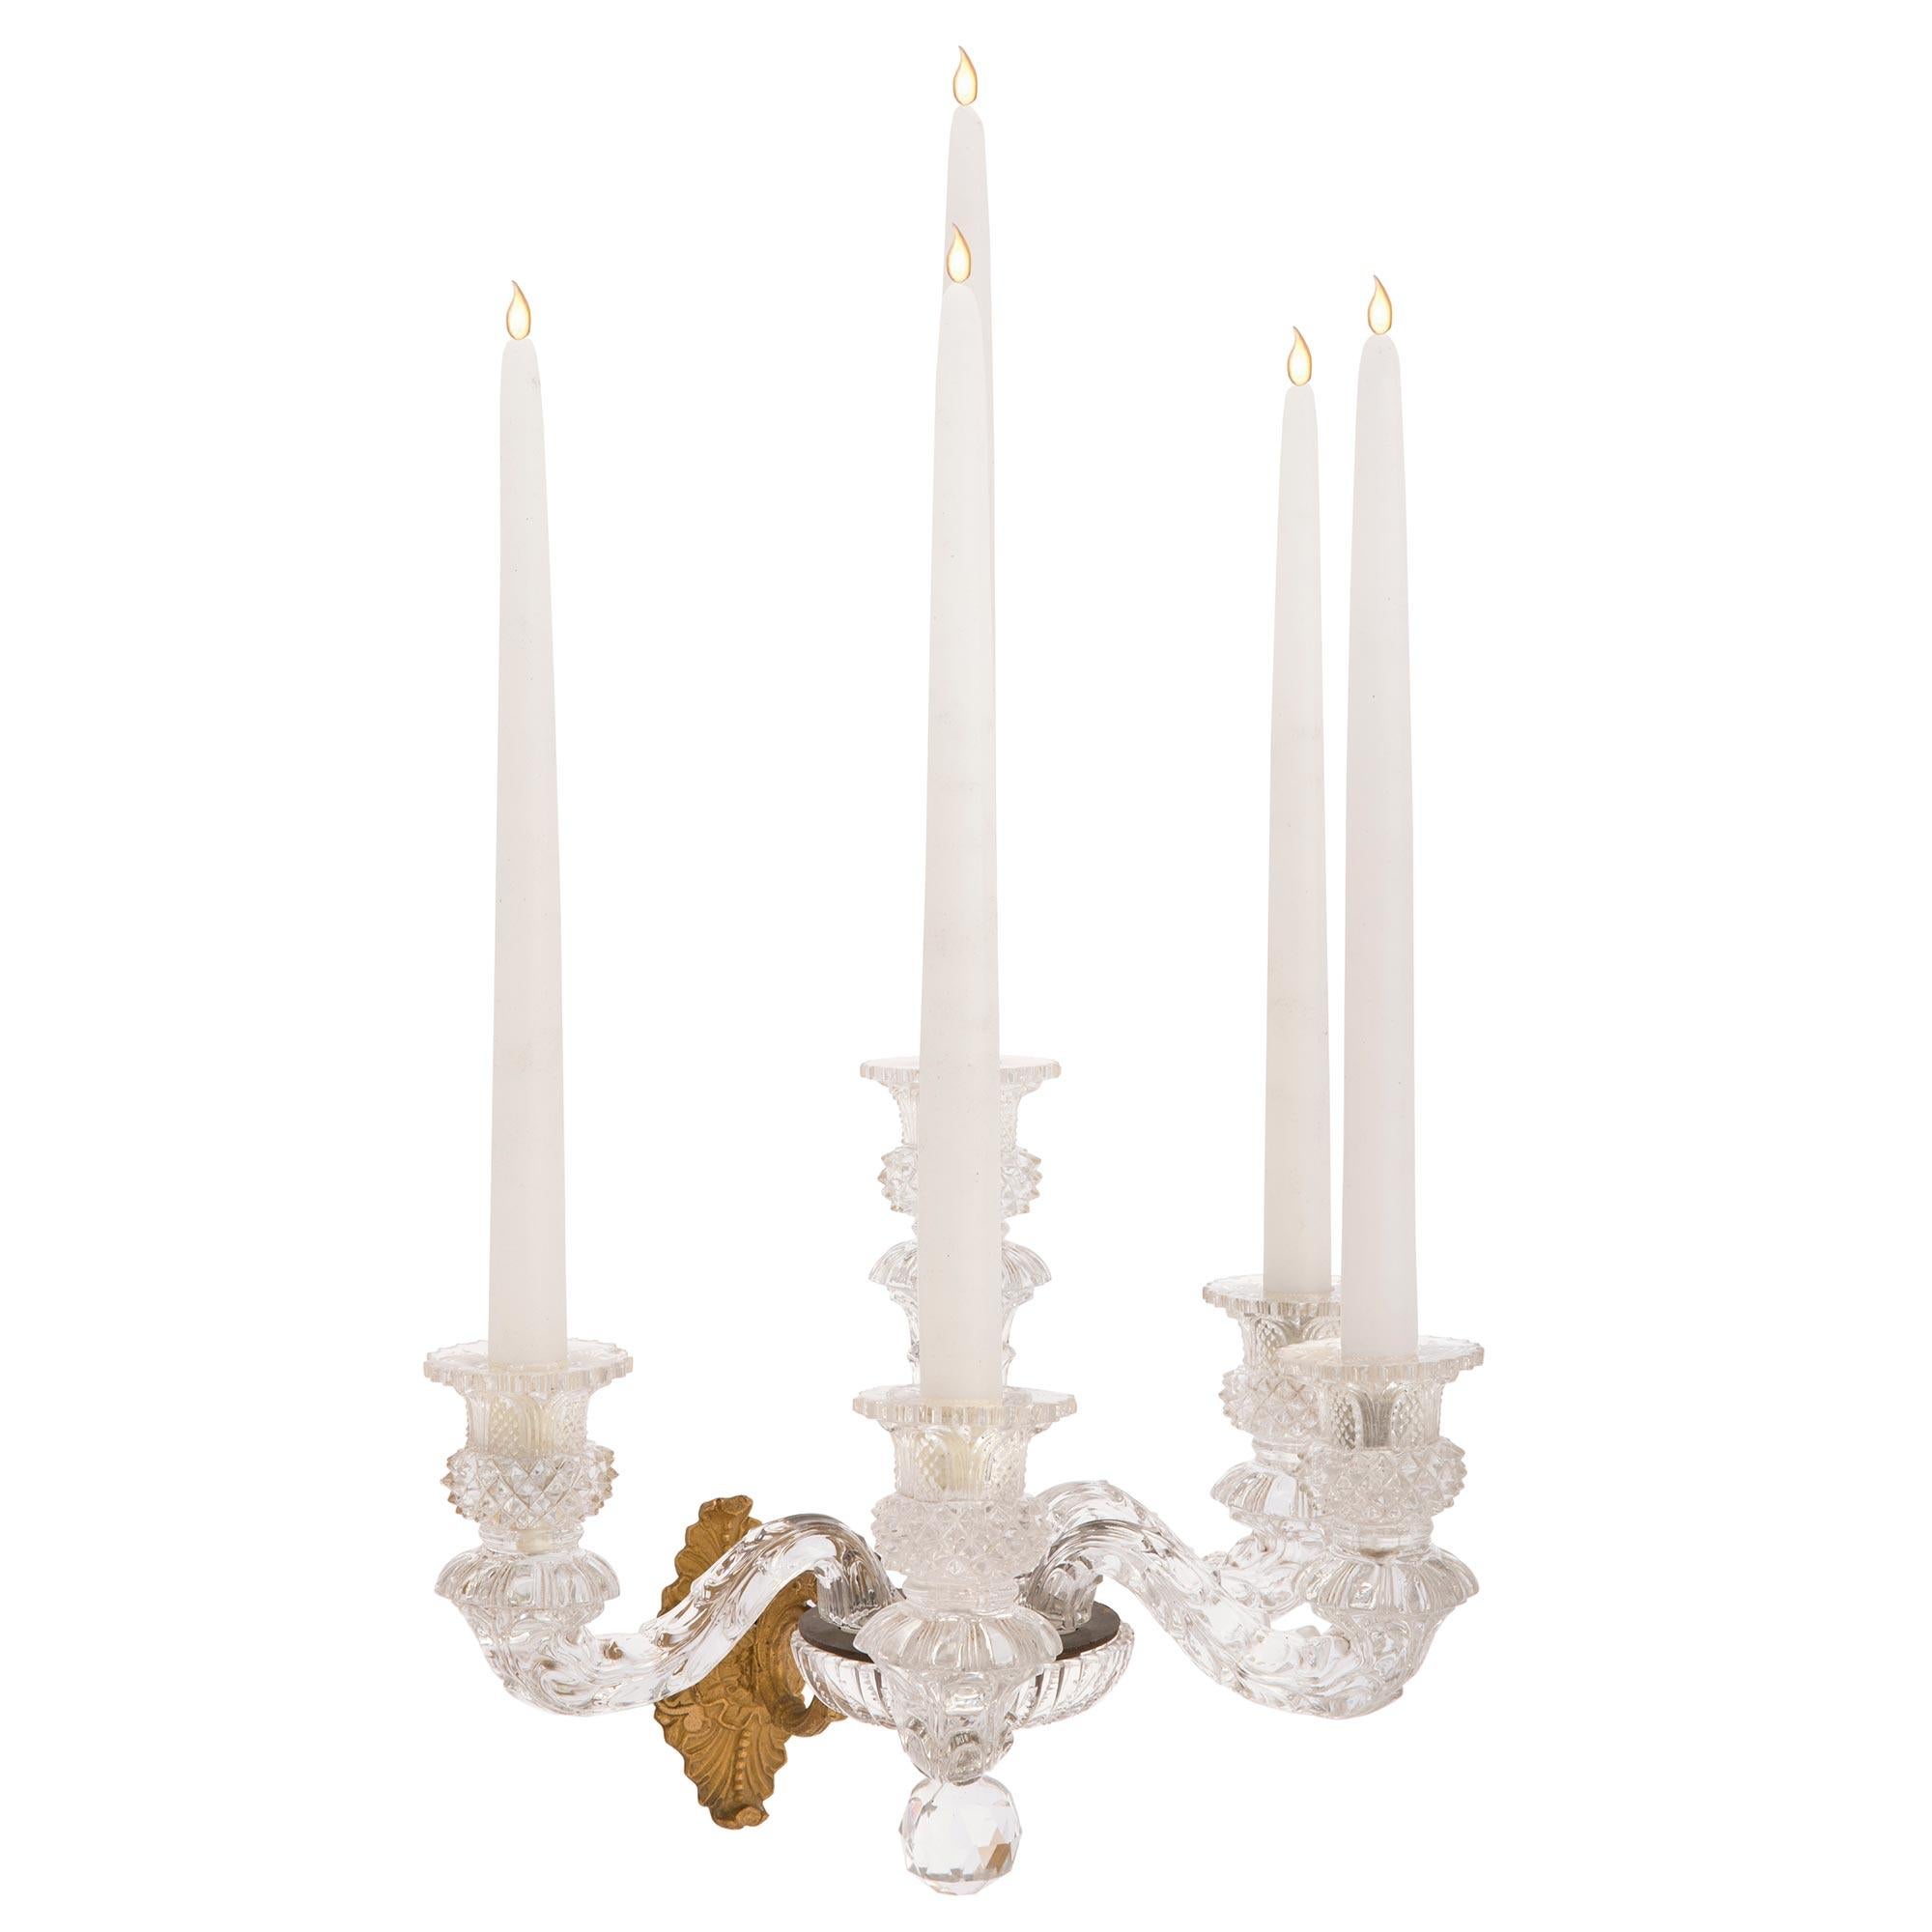 A sensational pair of French 19th century Charles X st. Baccarat crystal and ormolu sconces. Each five arm sconce is centered by a beautiful cut crystal ball below a fine fluted ormolu support and reeded bowl. The ormolu backplates display beautiful